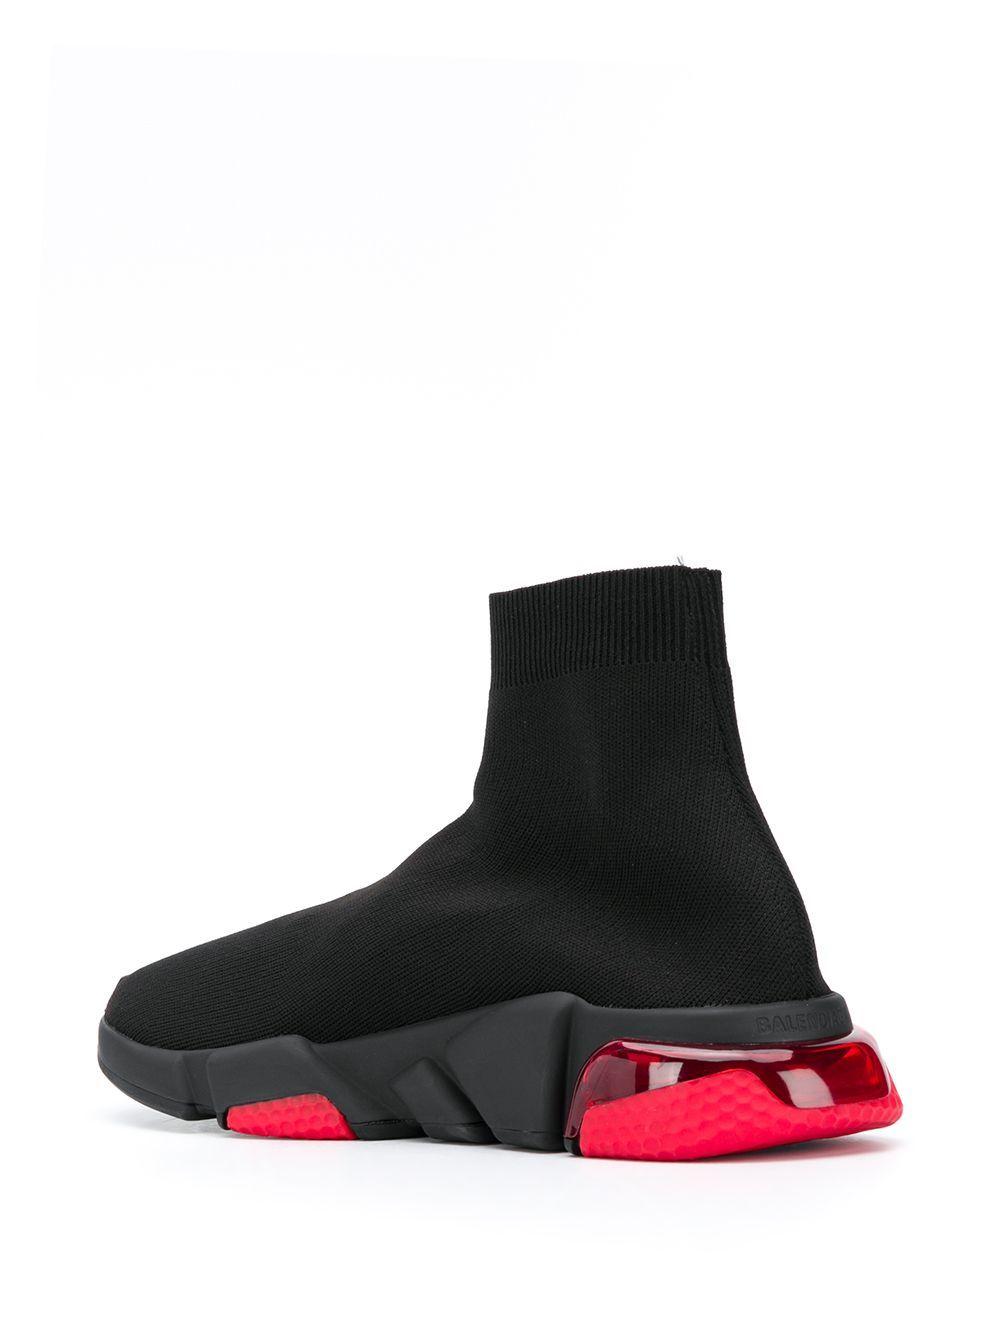 Balenciaga Synthetic Speed Lt Clear Sneaker Black/red for Men - Save 16% |  Lyst